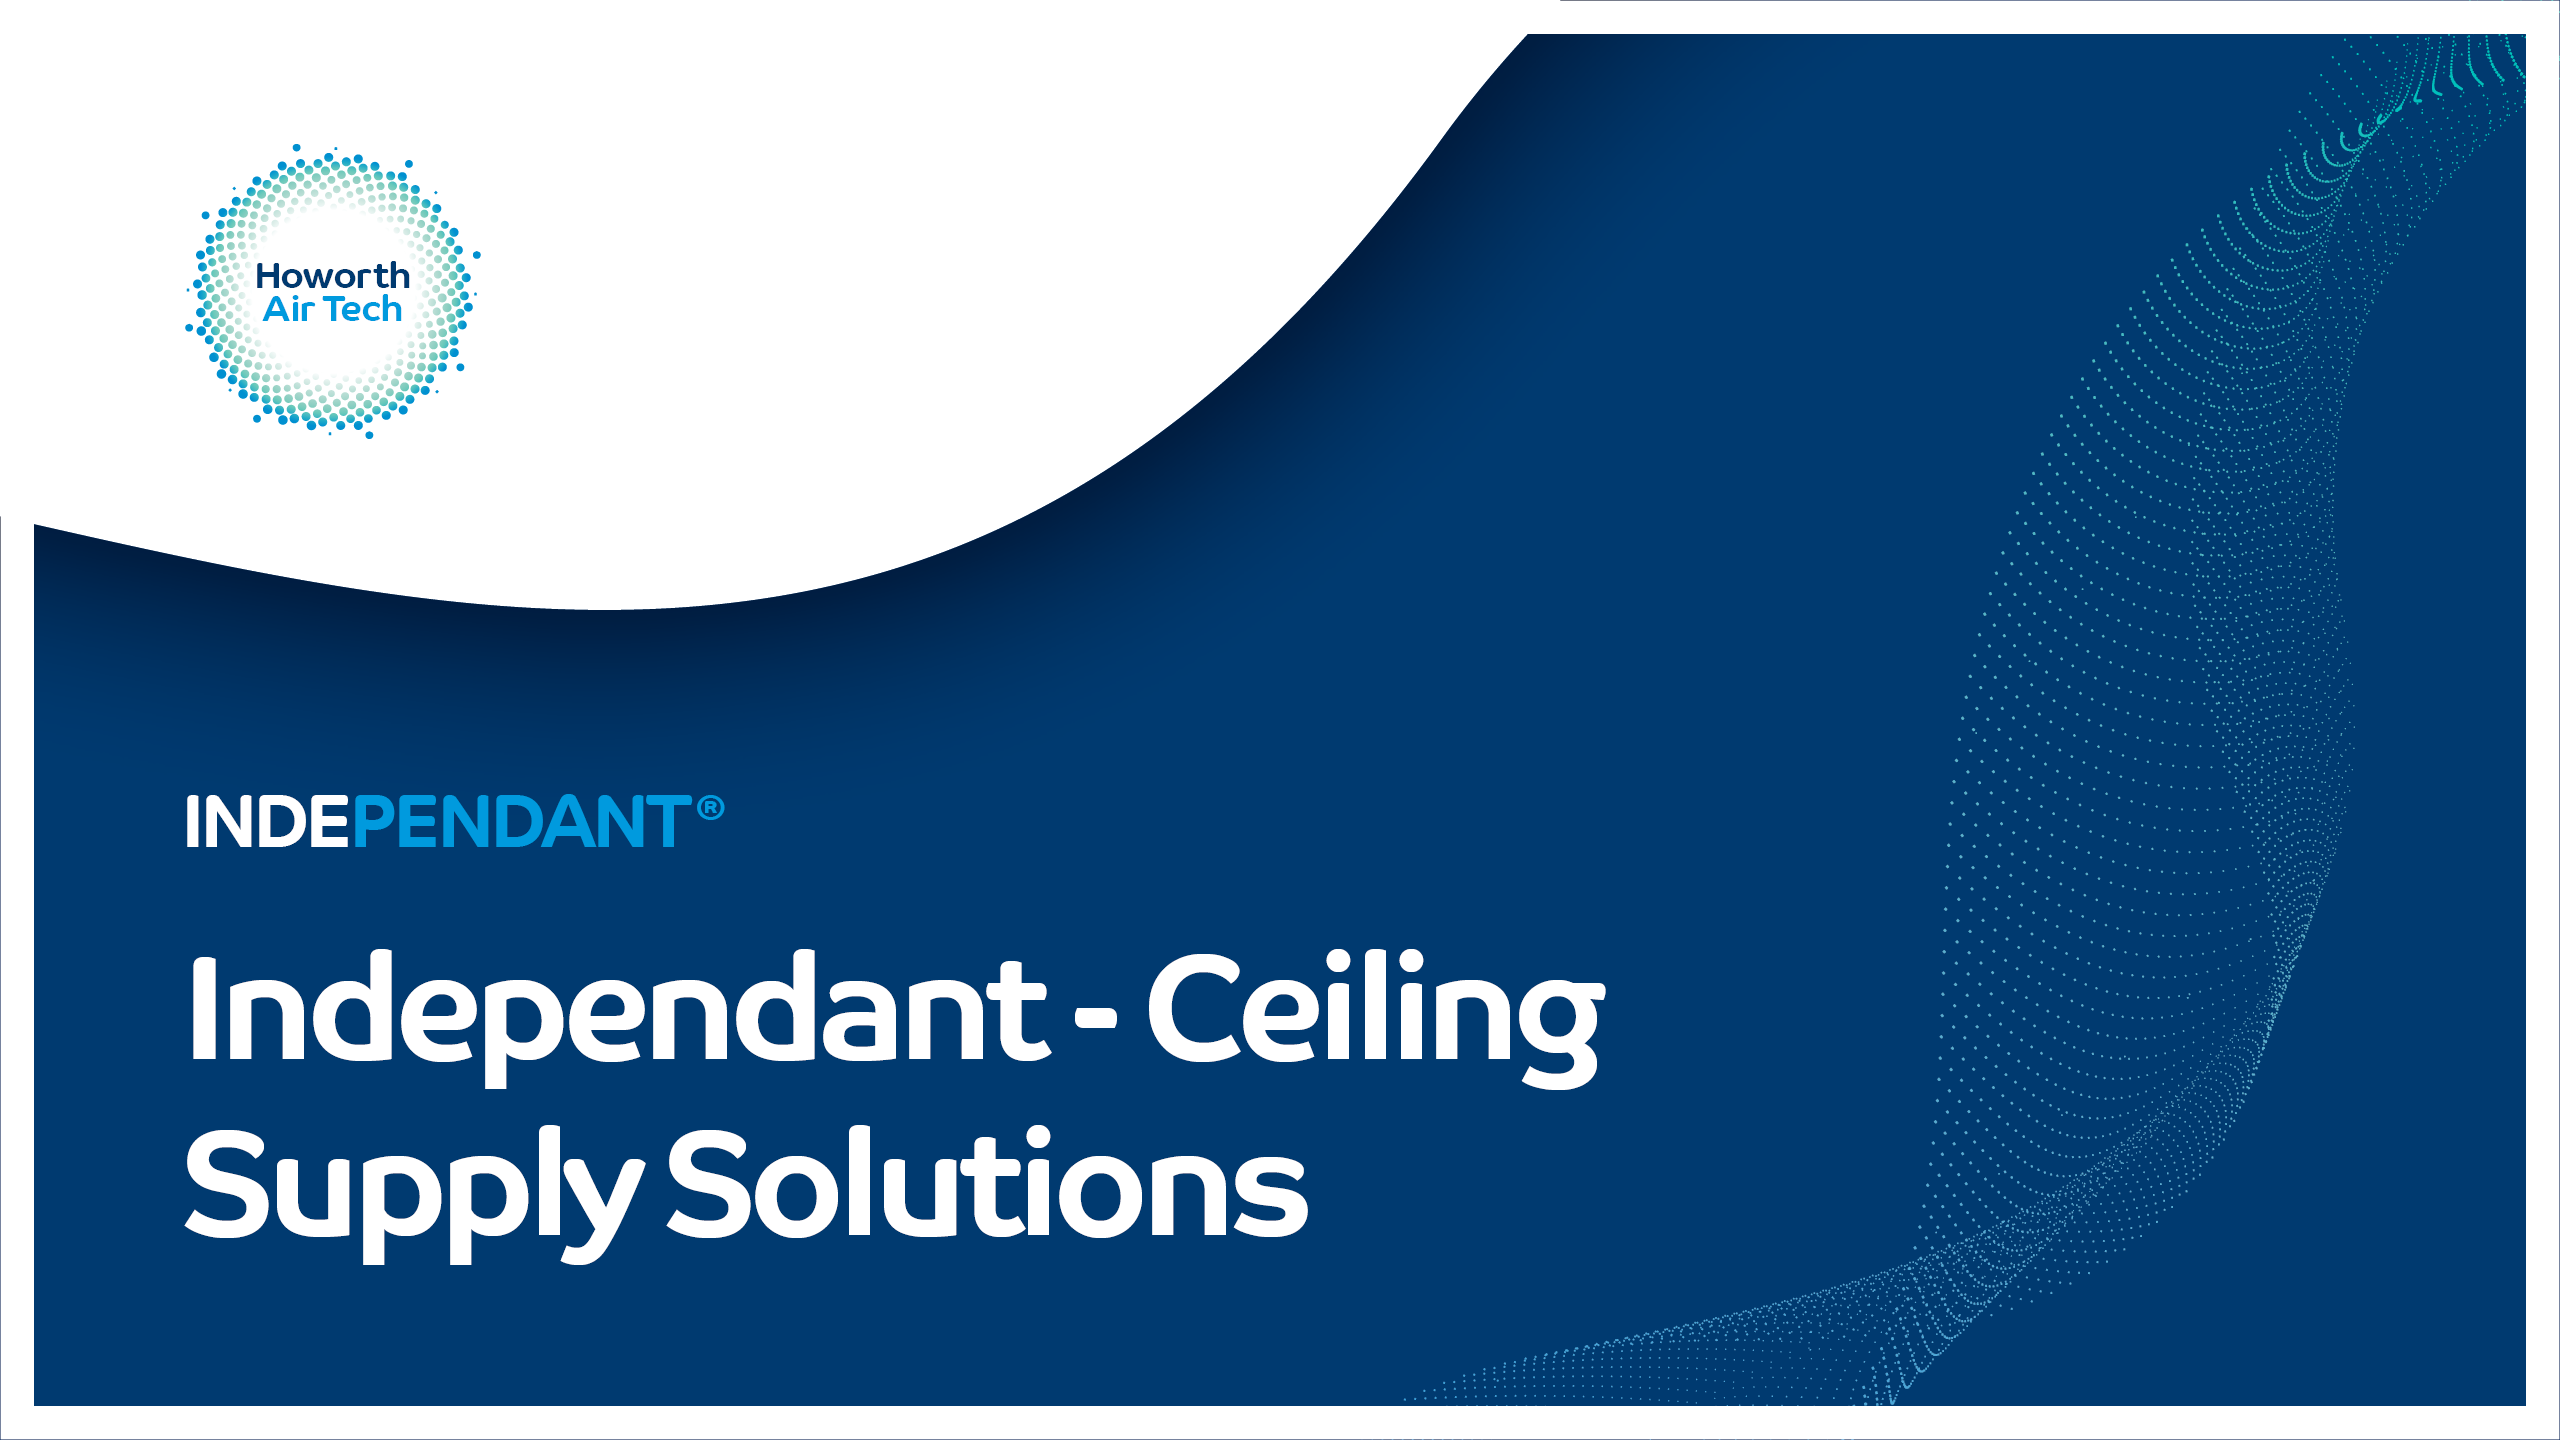 Independant - ceiling supply solutions